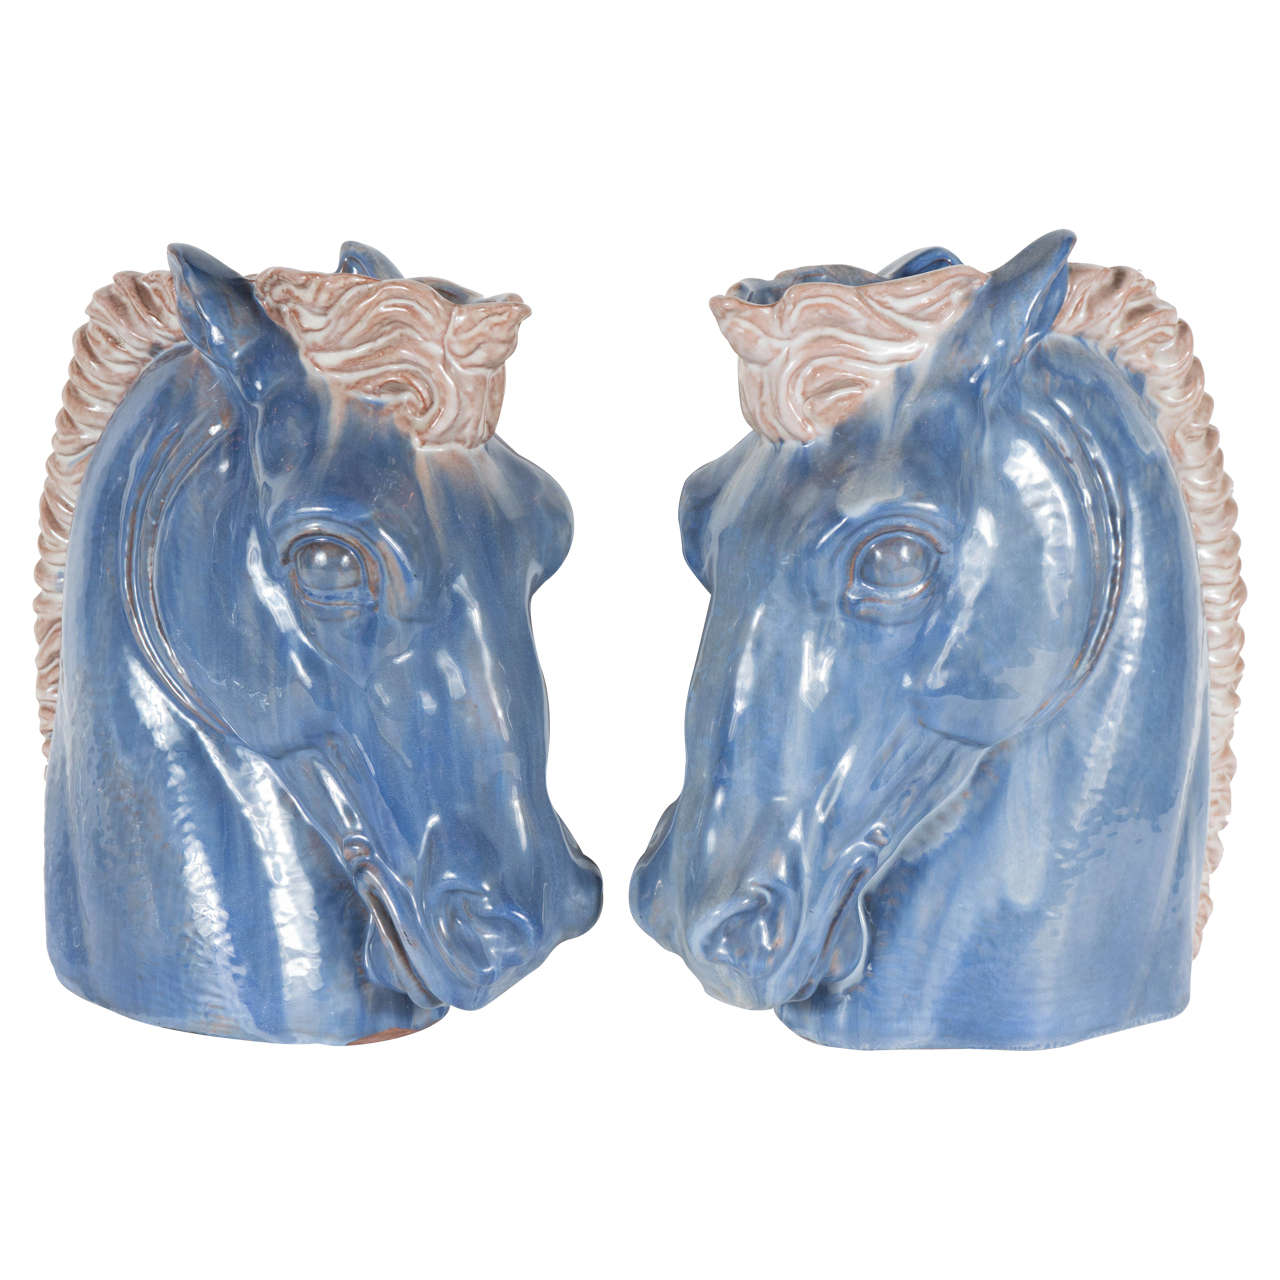 Stunning Pair of 1940s Hand-Painted Ceramic Horse Head Vases by Stangl